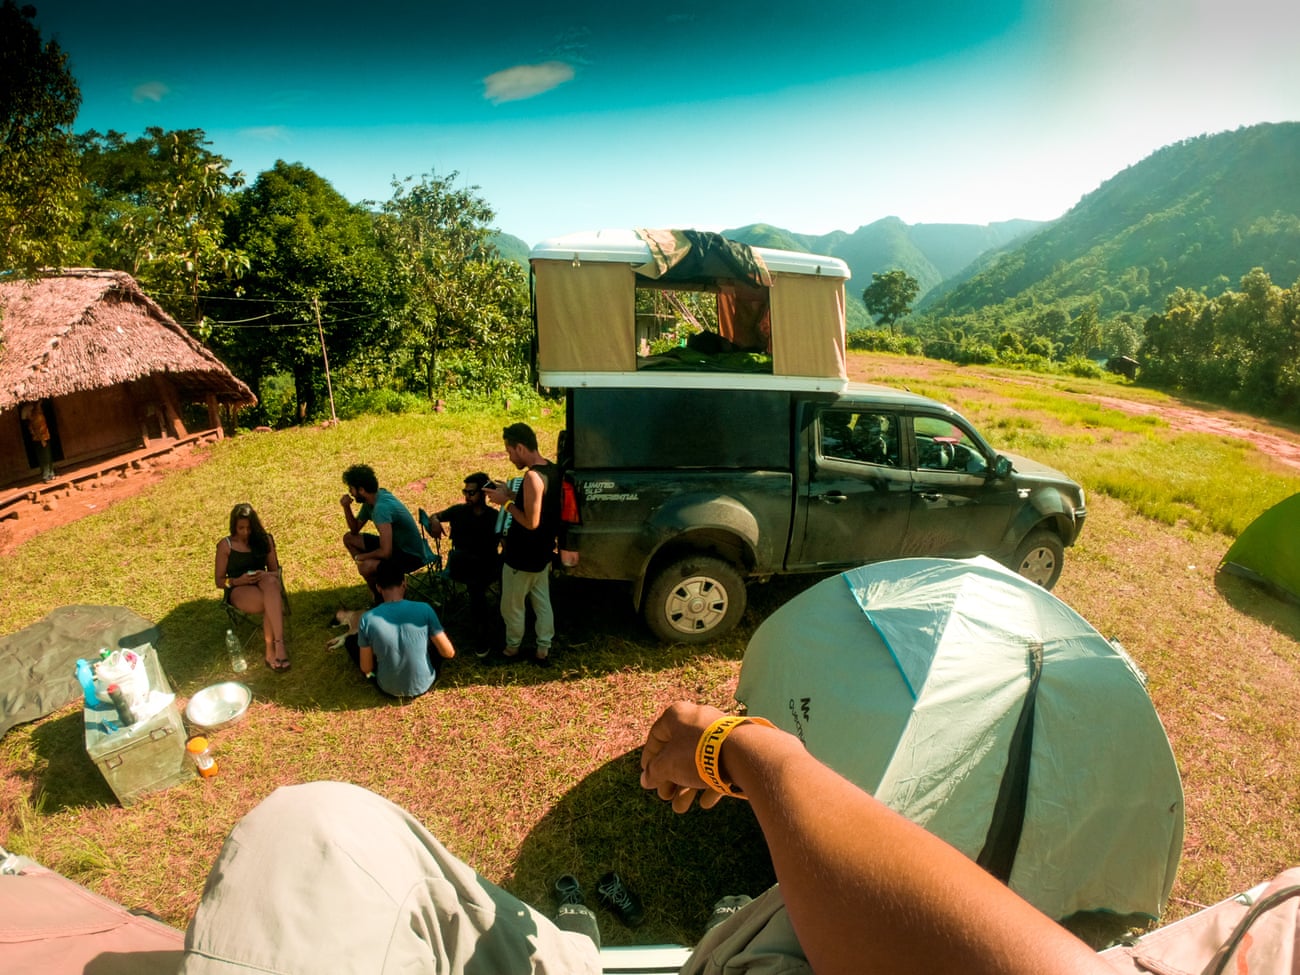 Young people camp next to their campervan among hills in India